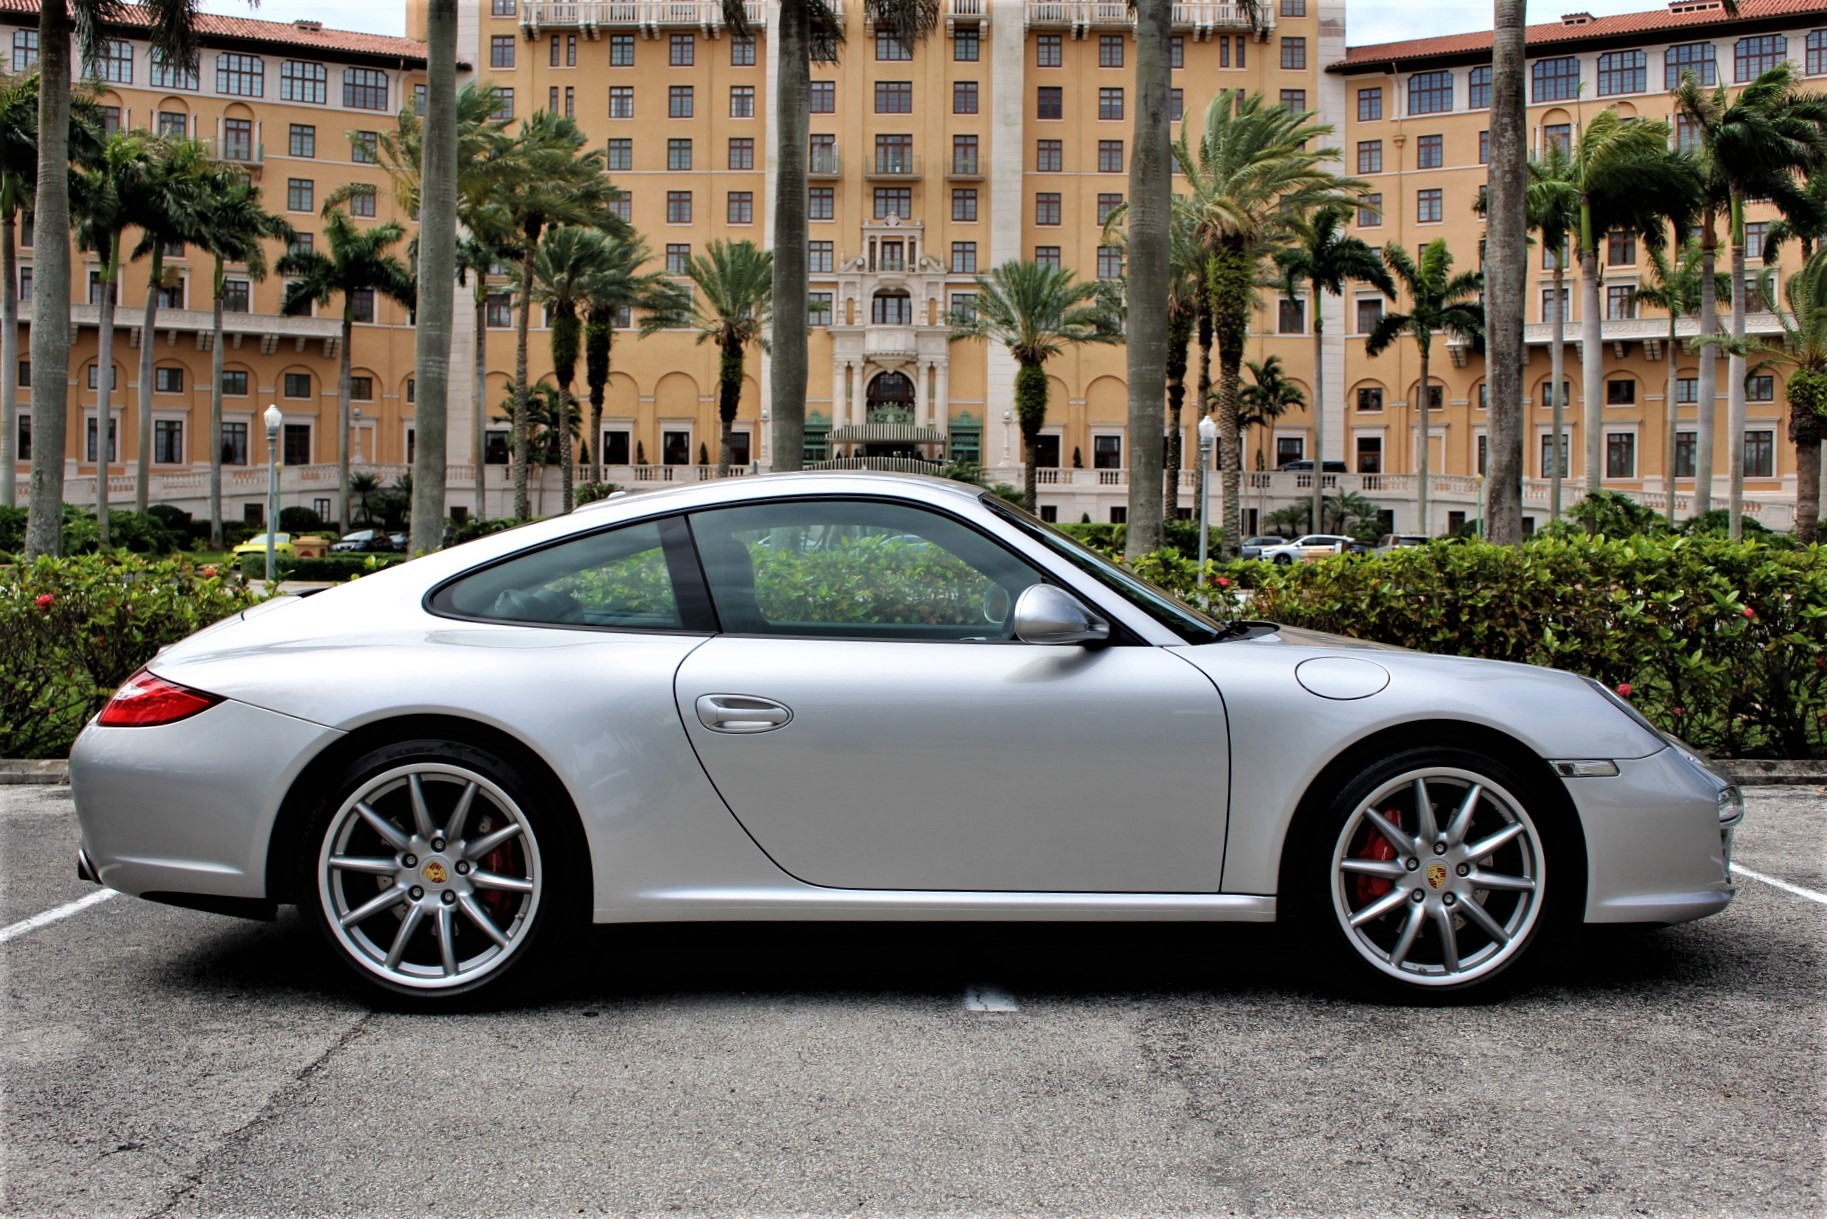 Used 2009 Porsche 911 Carrera 4S for sale Sold at The Gables Sports Cars in Miami FL 33146 2